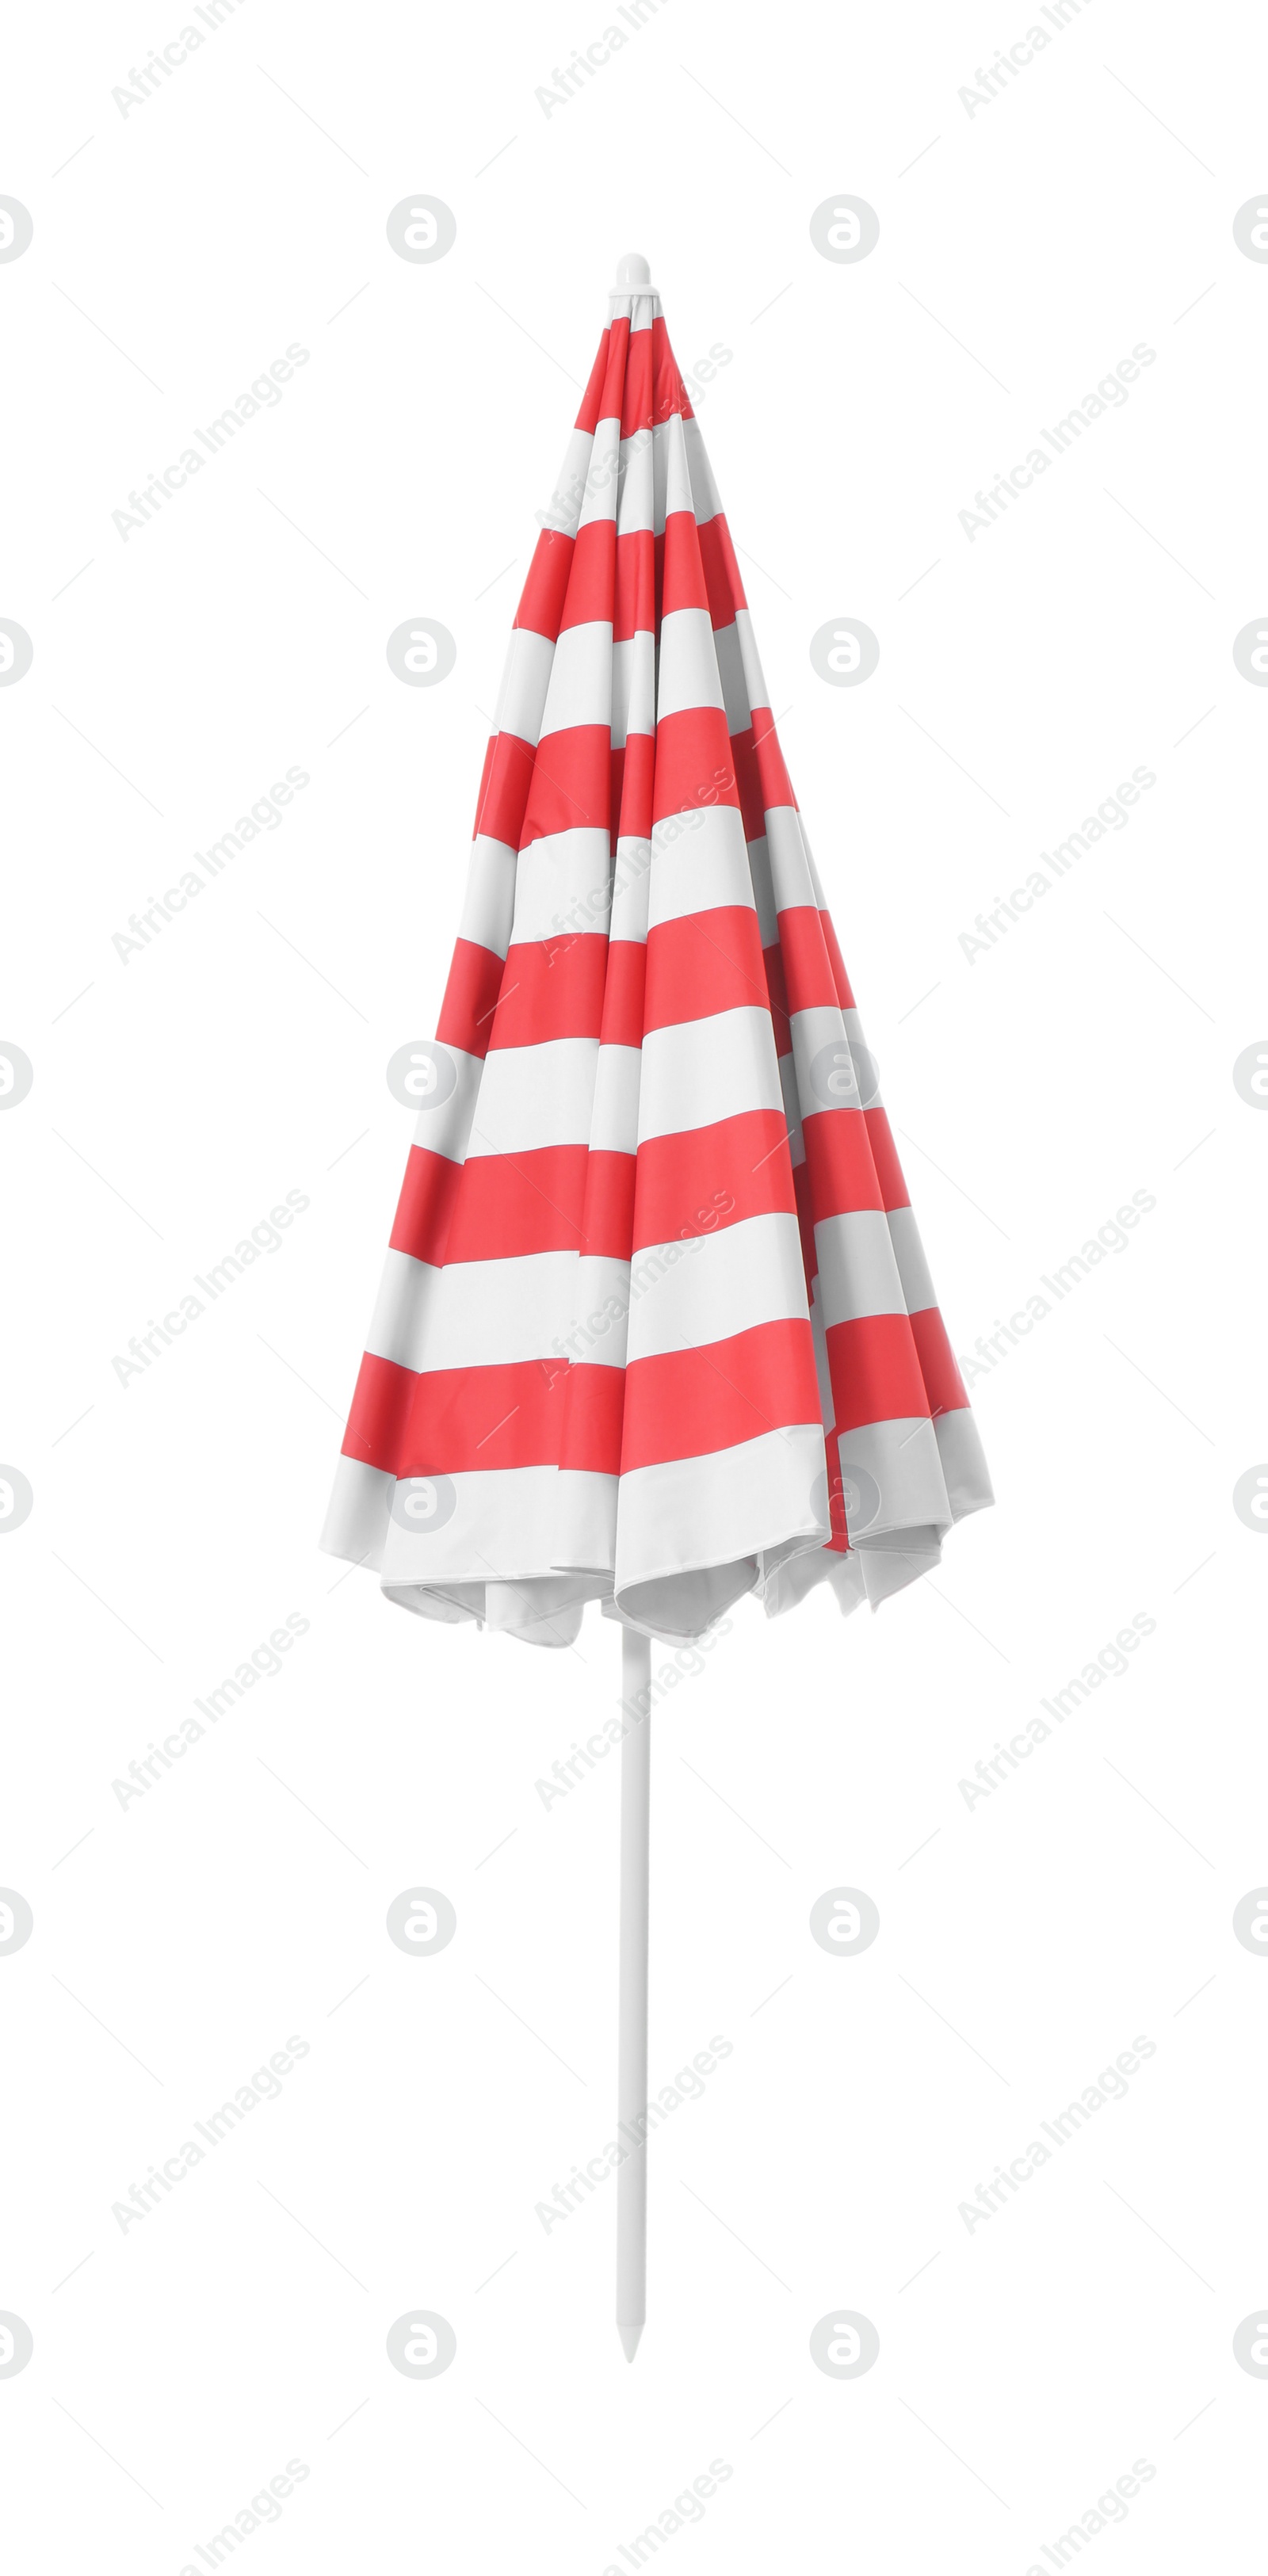 Photo of Closed red striped beach umbrella isolated on white